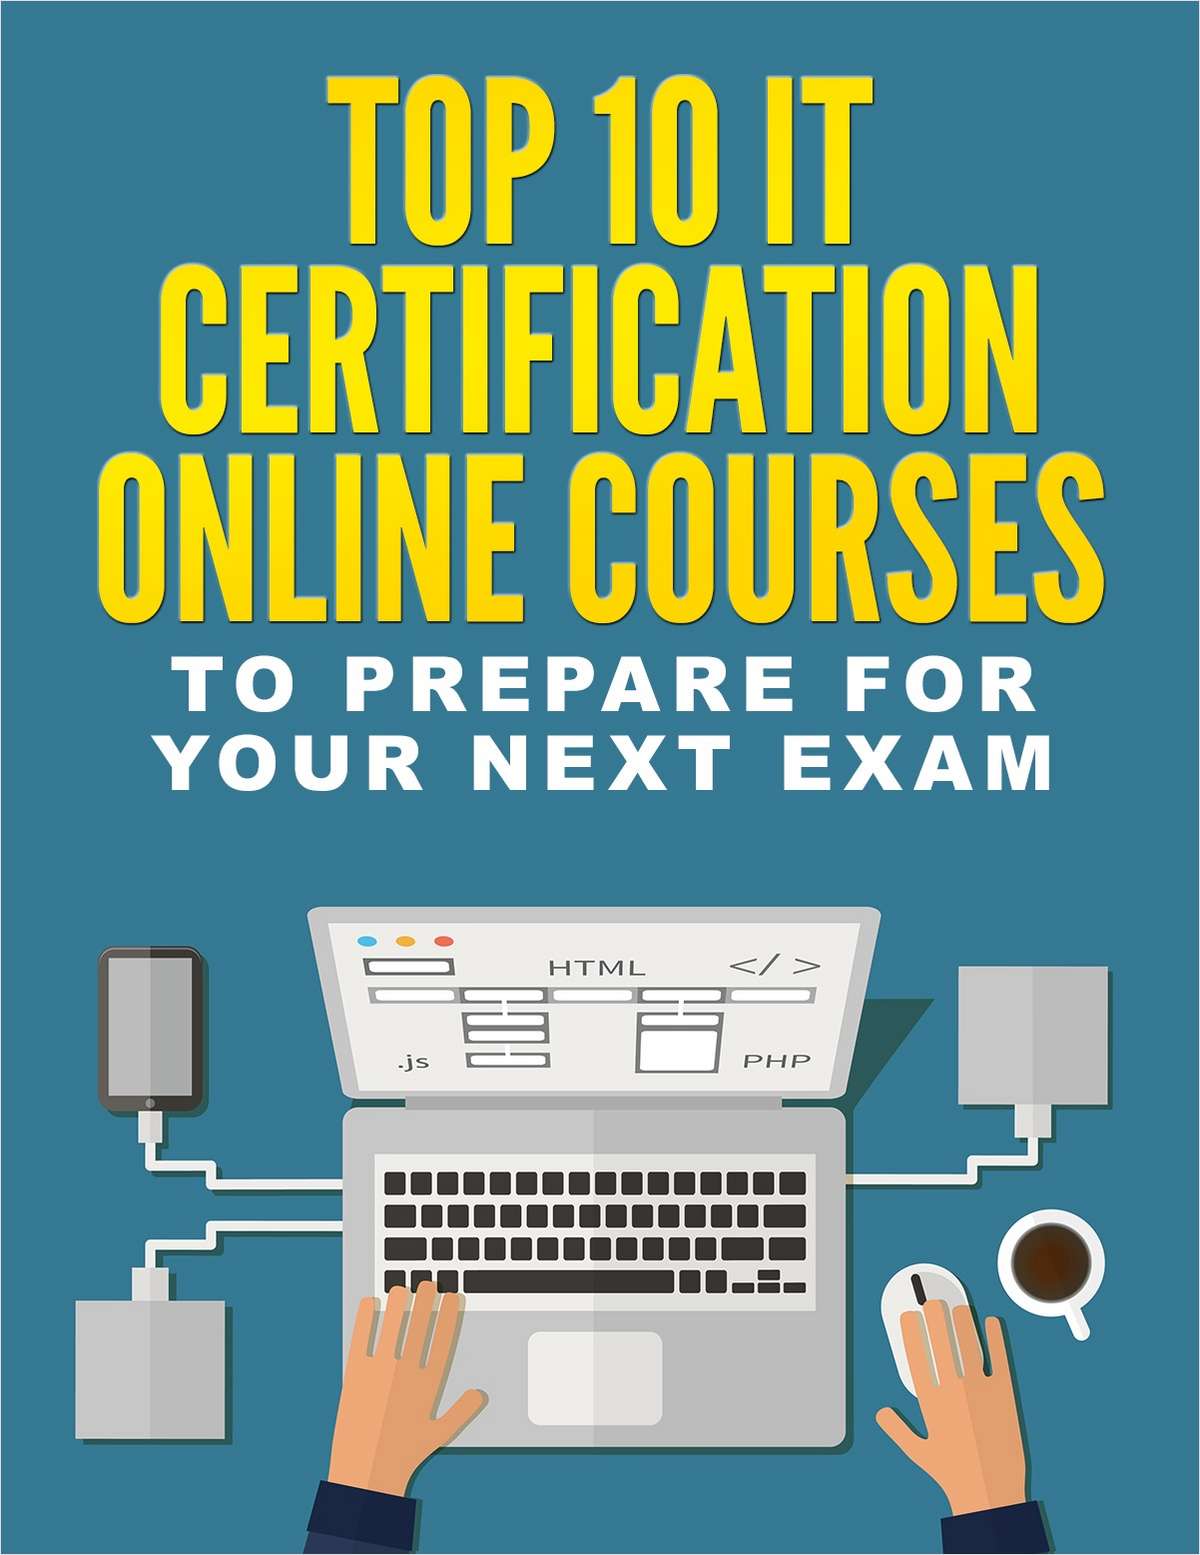 Top 10 IT Certification Online Courses to Prepare for Your Next Exam